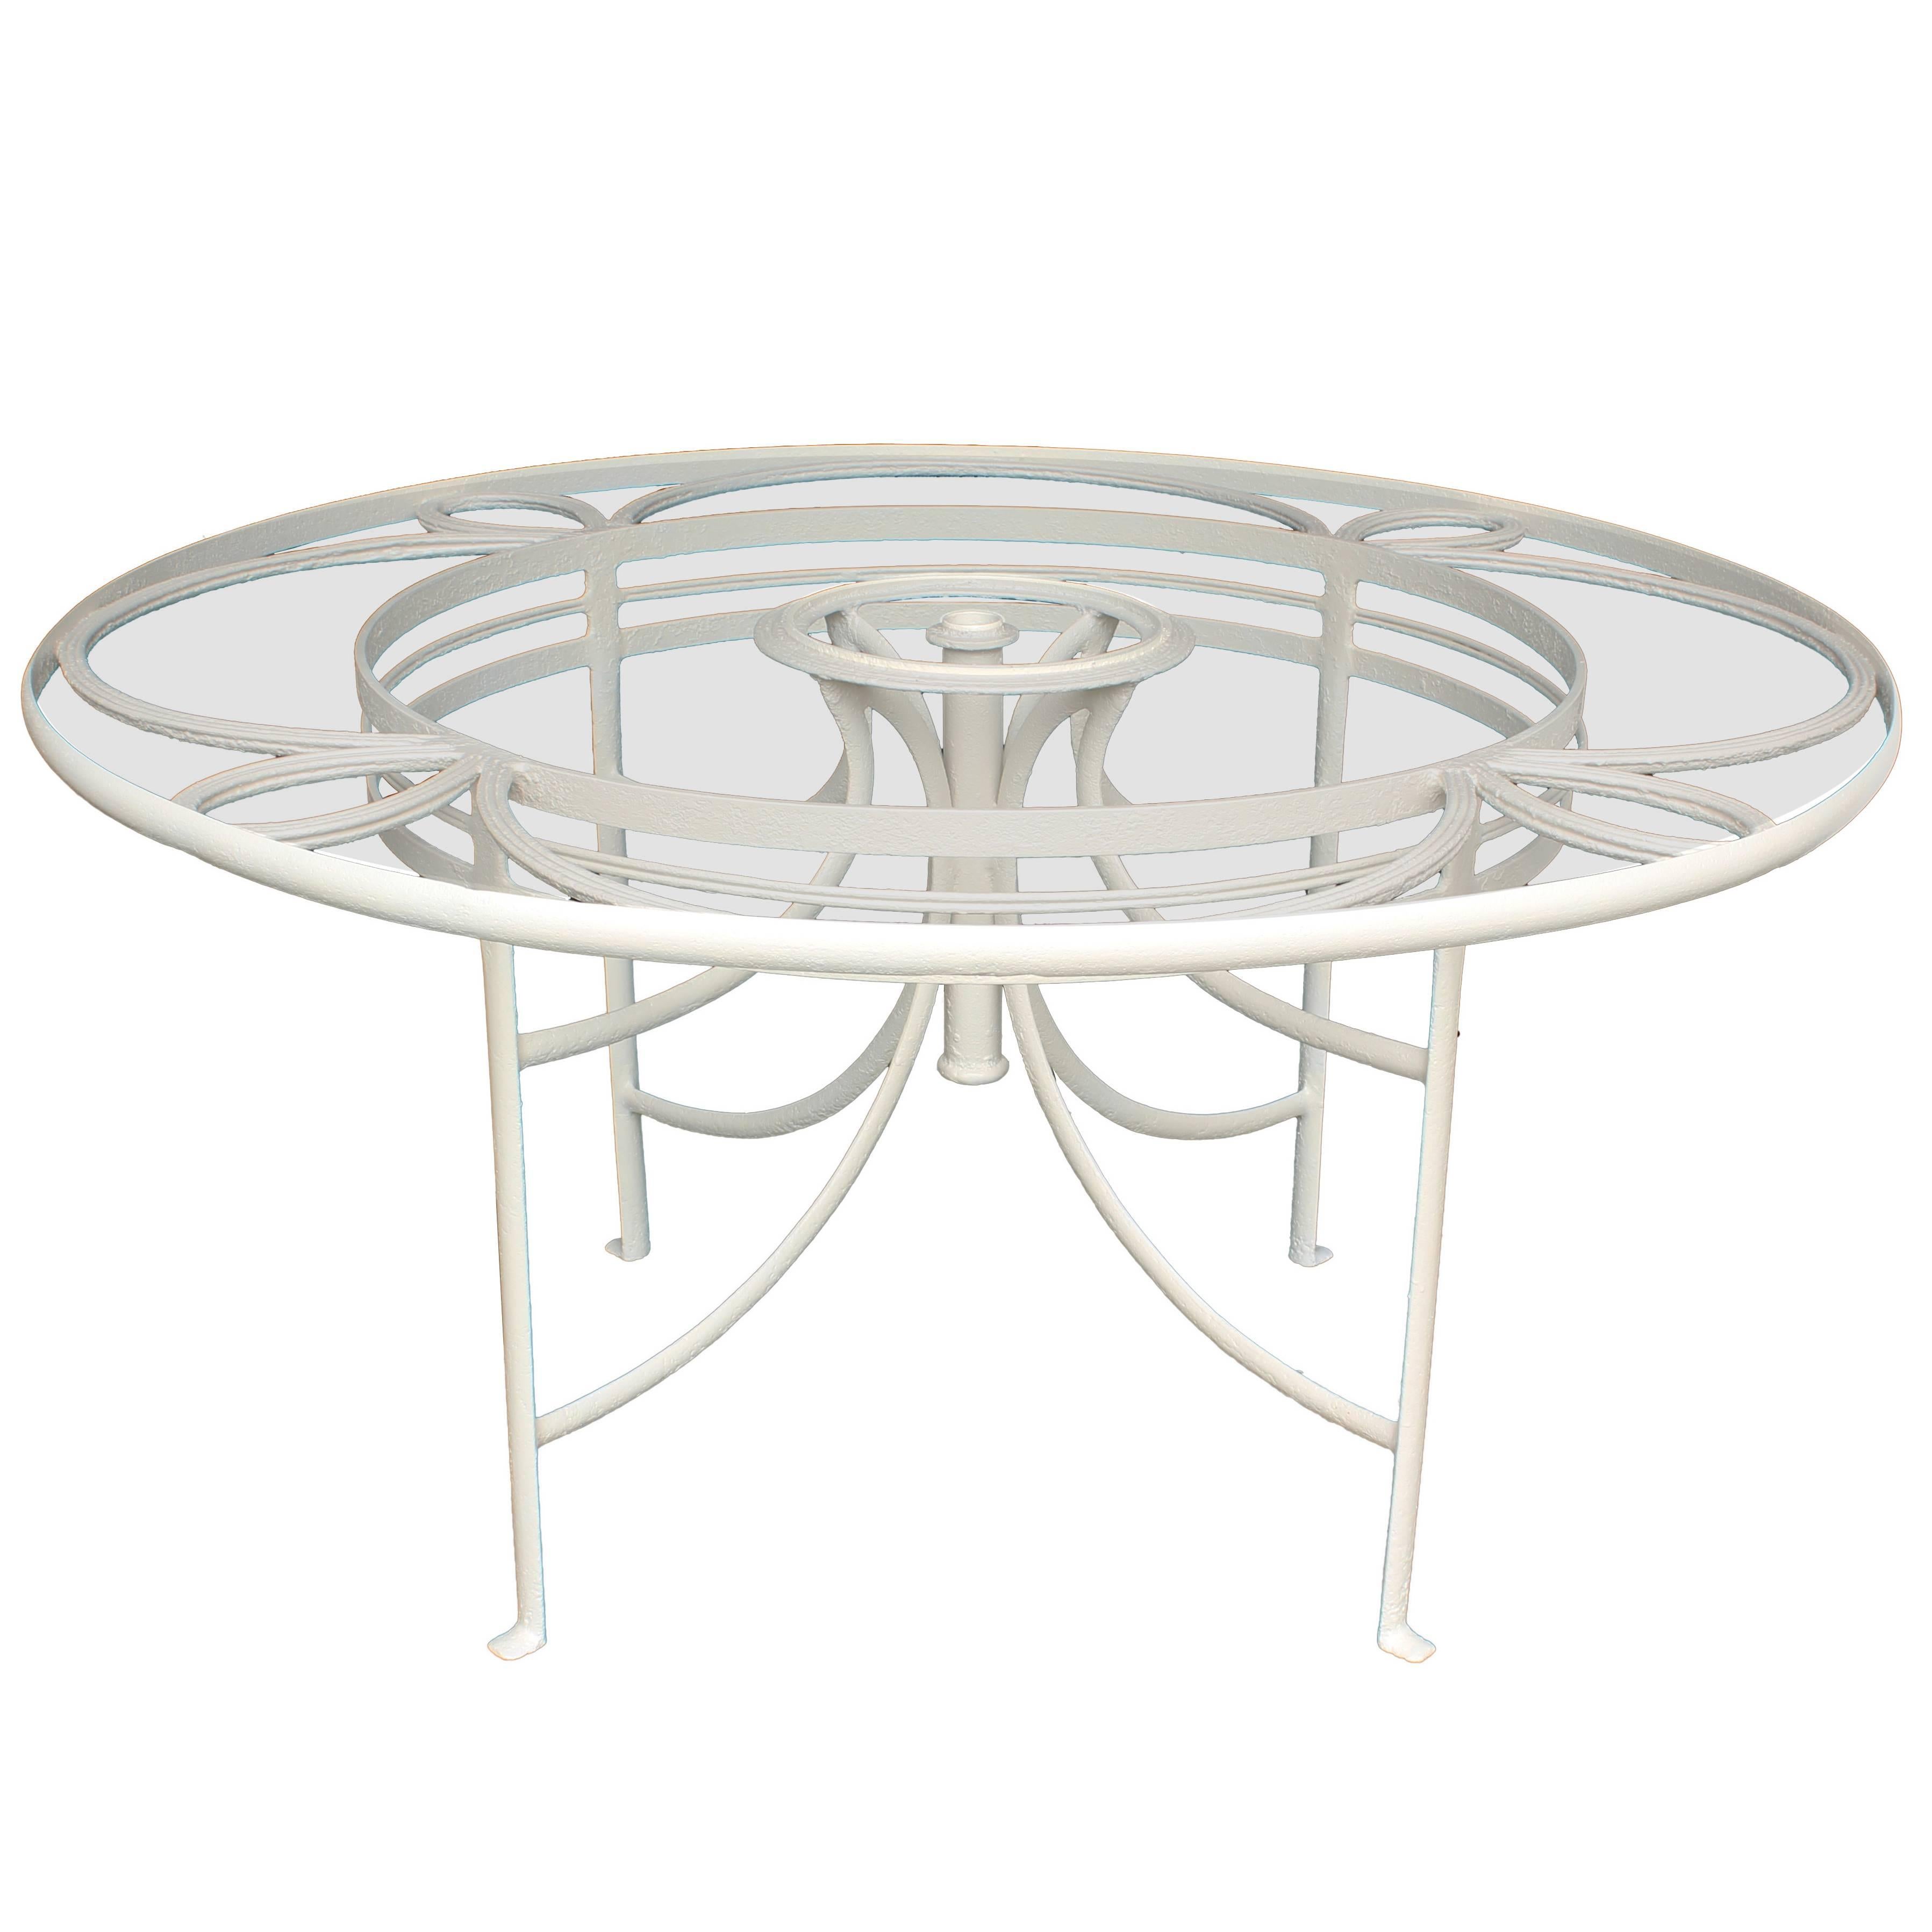 1930s White French Iron and Glass Outdoor Garden Dining Table Round